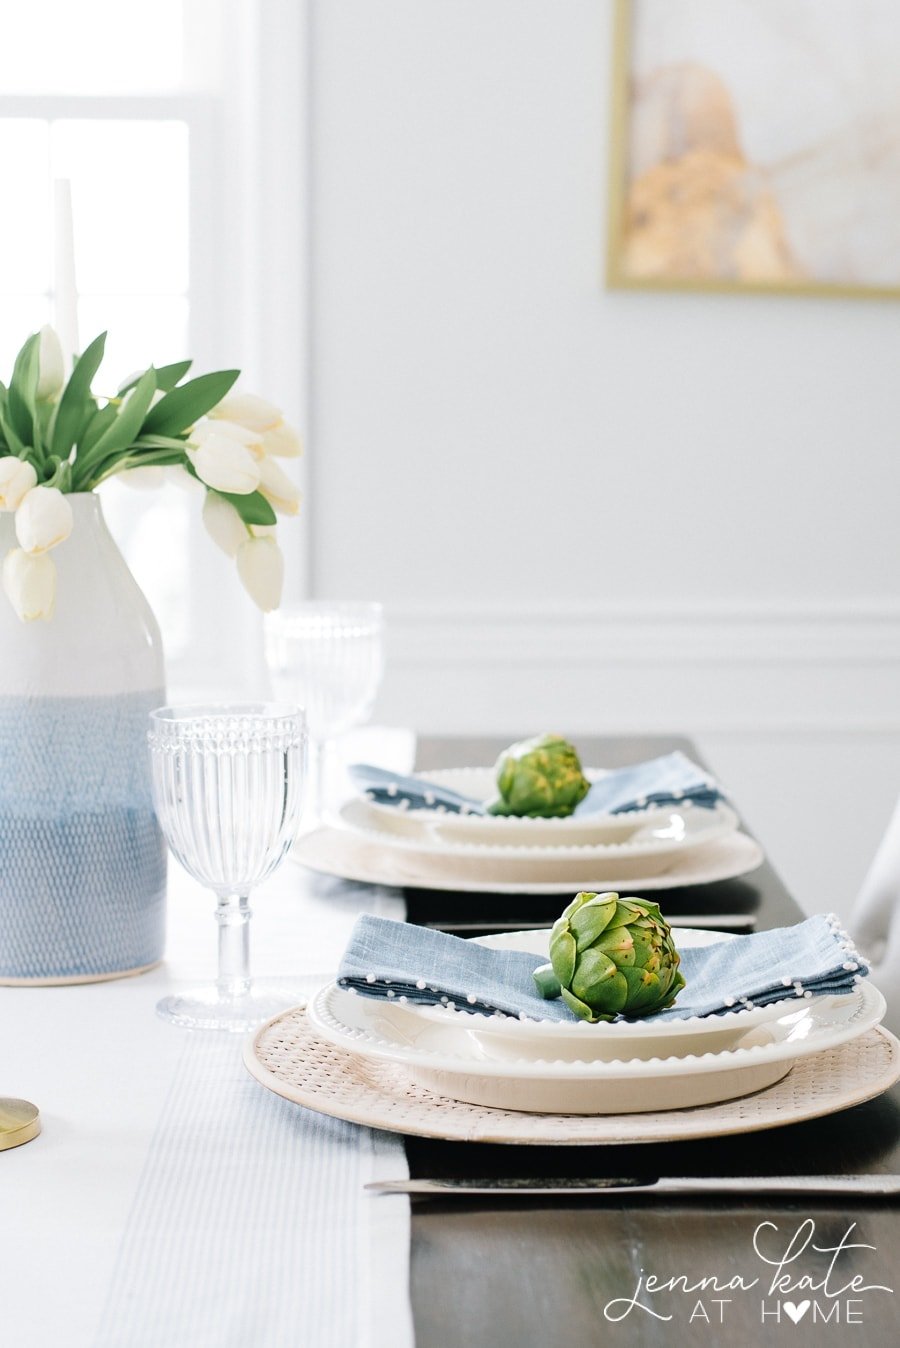 Tulips and artichokes for the perfect simple spring tablescape